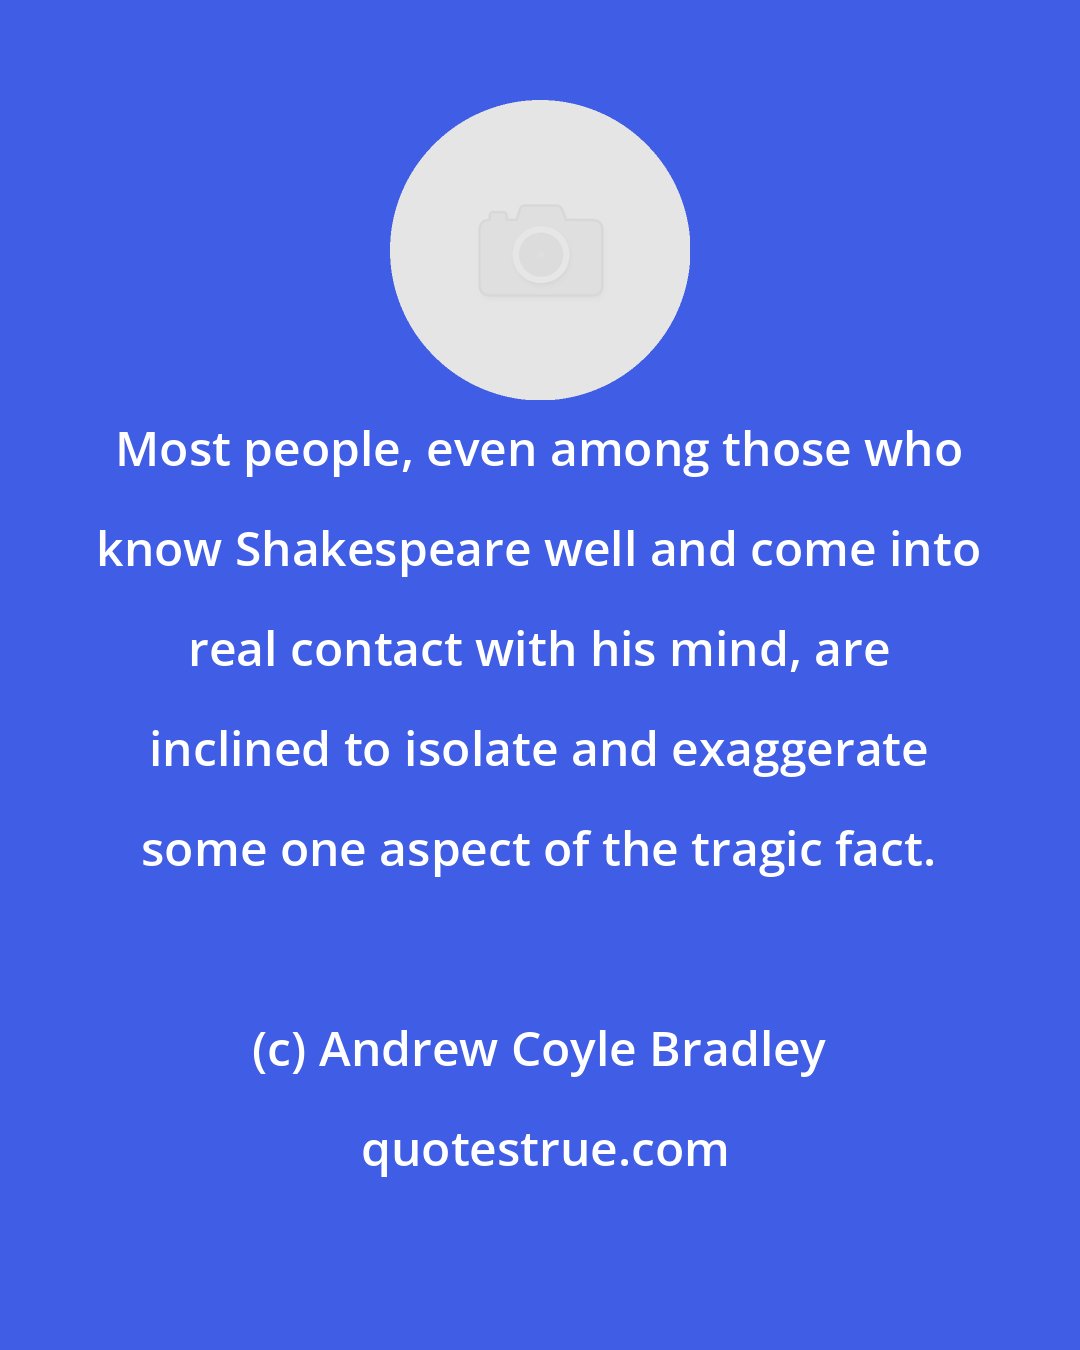 Andrew Coyle Bradley: Most people, even among those who know Shakespeare well and come into real contact with his mind, are inclined to isolate and exaggerate some one aspect of the tragic fact.